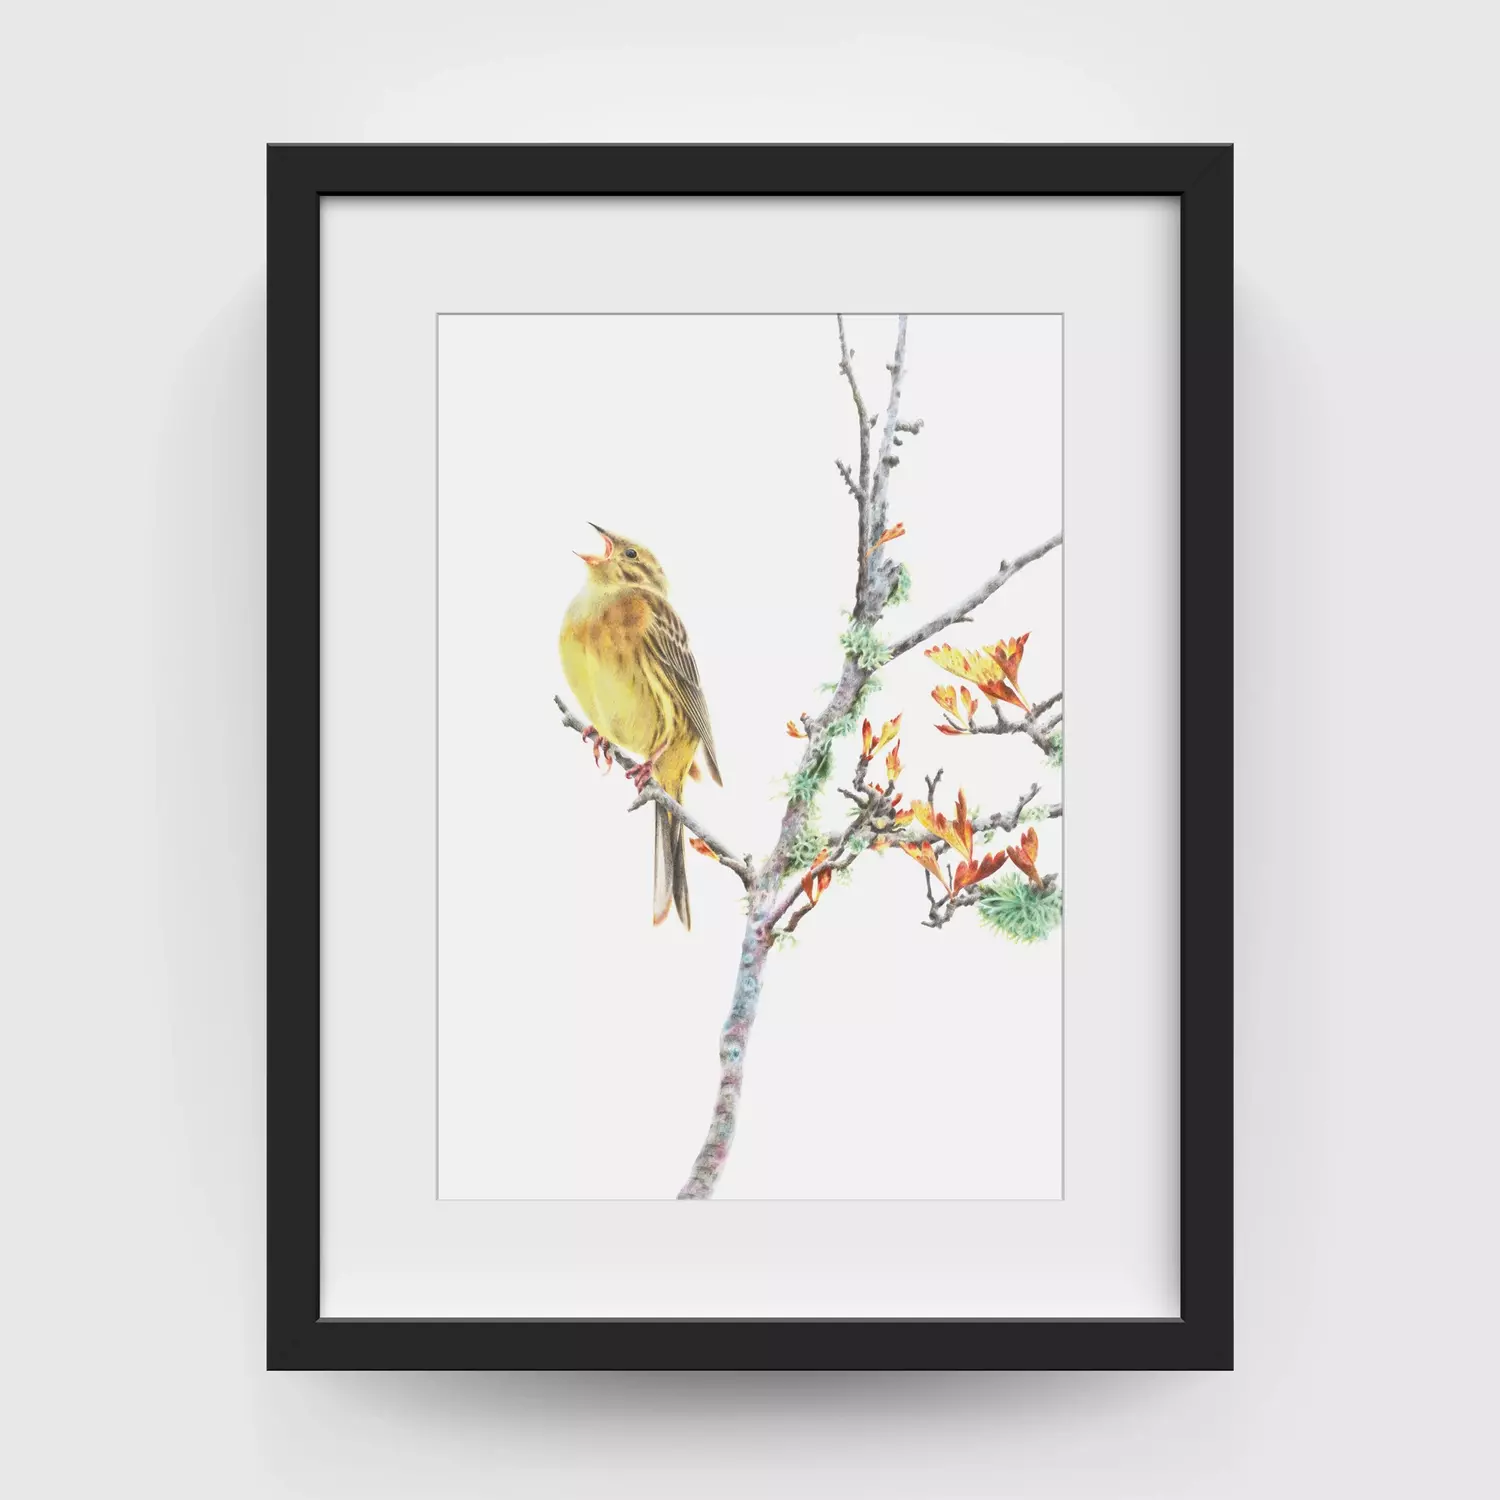 Yellowhammer Framed Picture